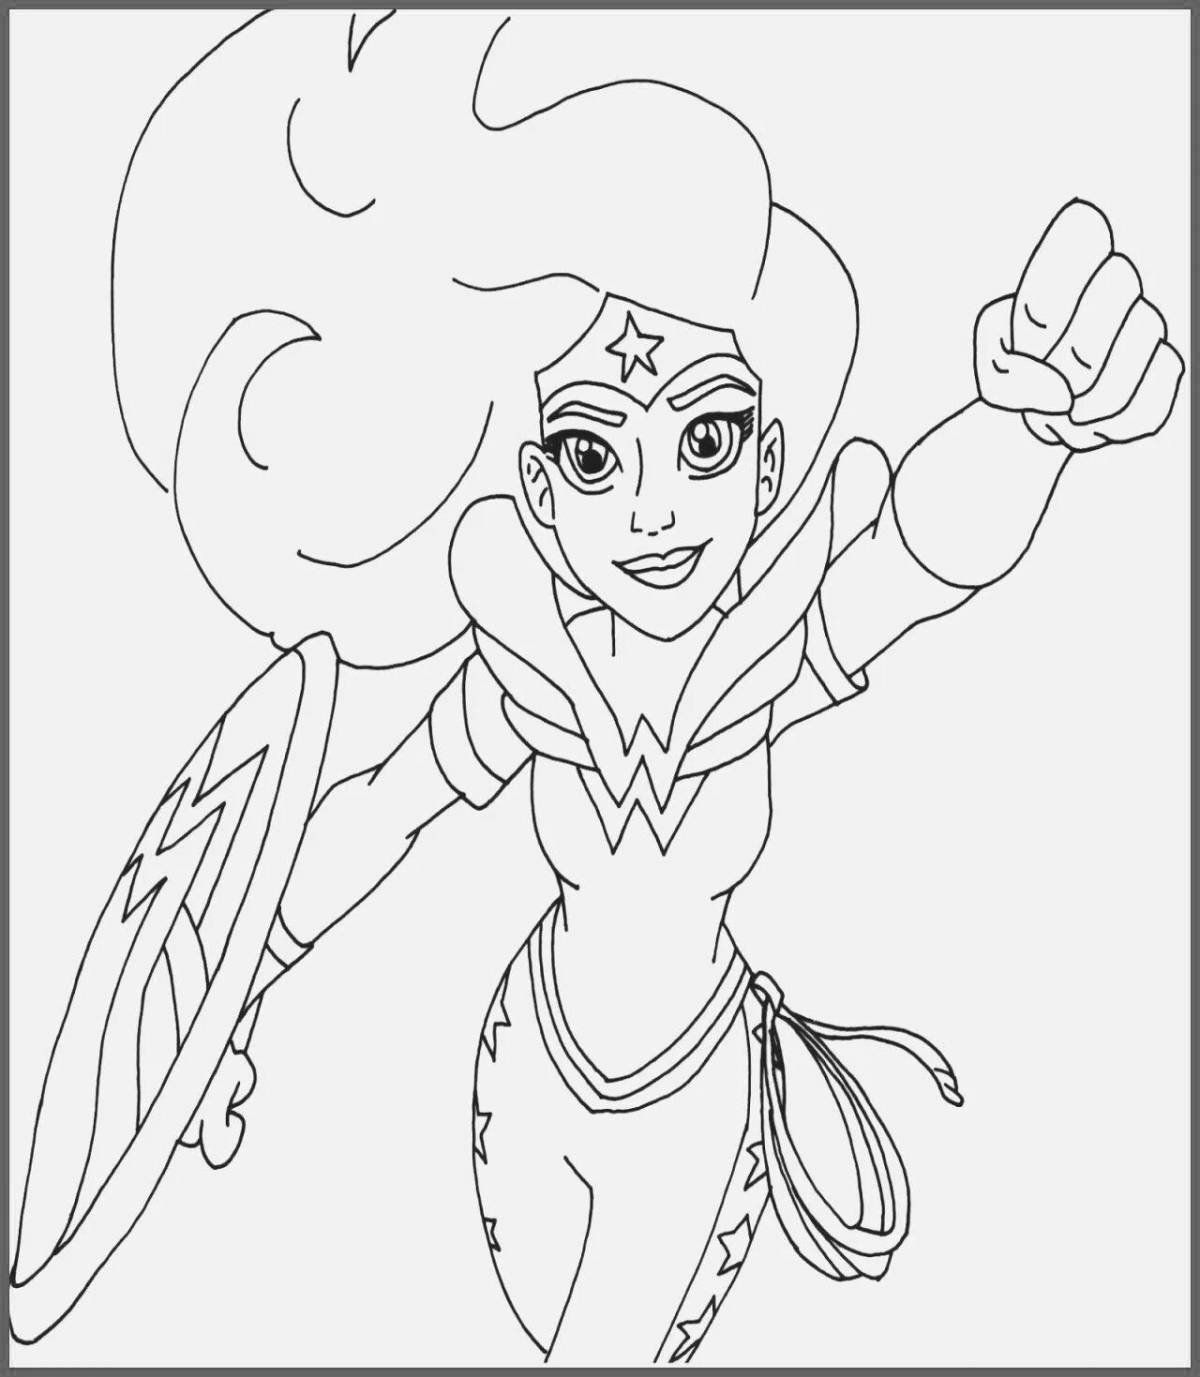 Fascinating super hero high coloring page